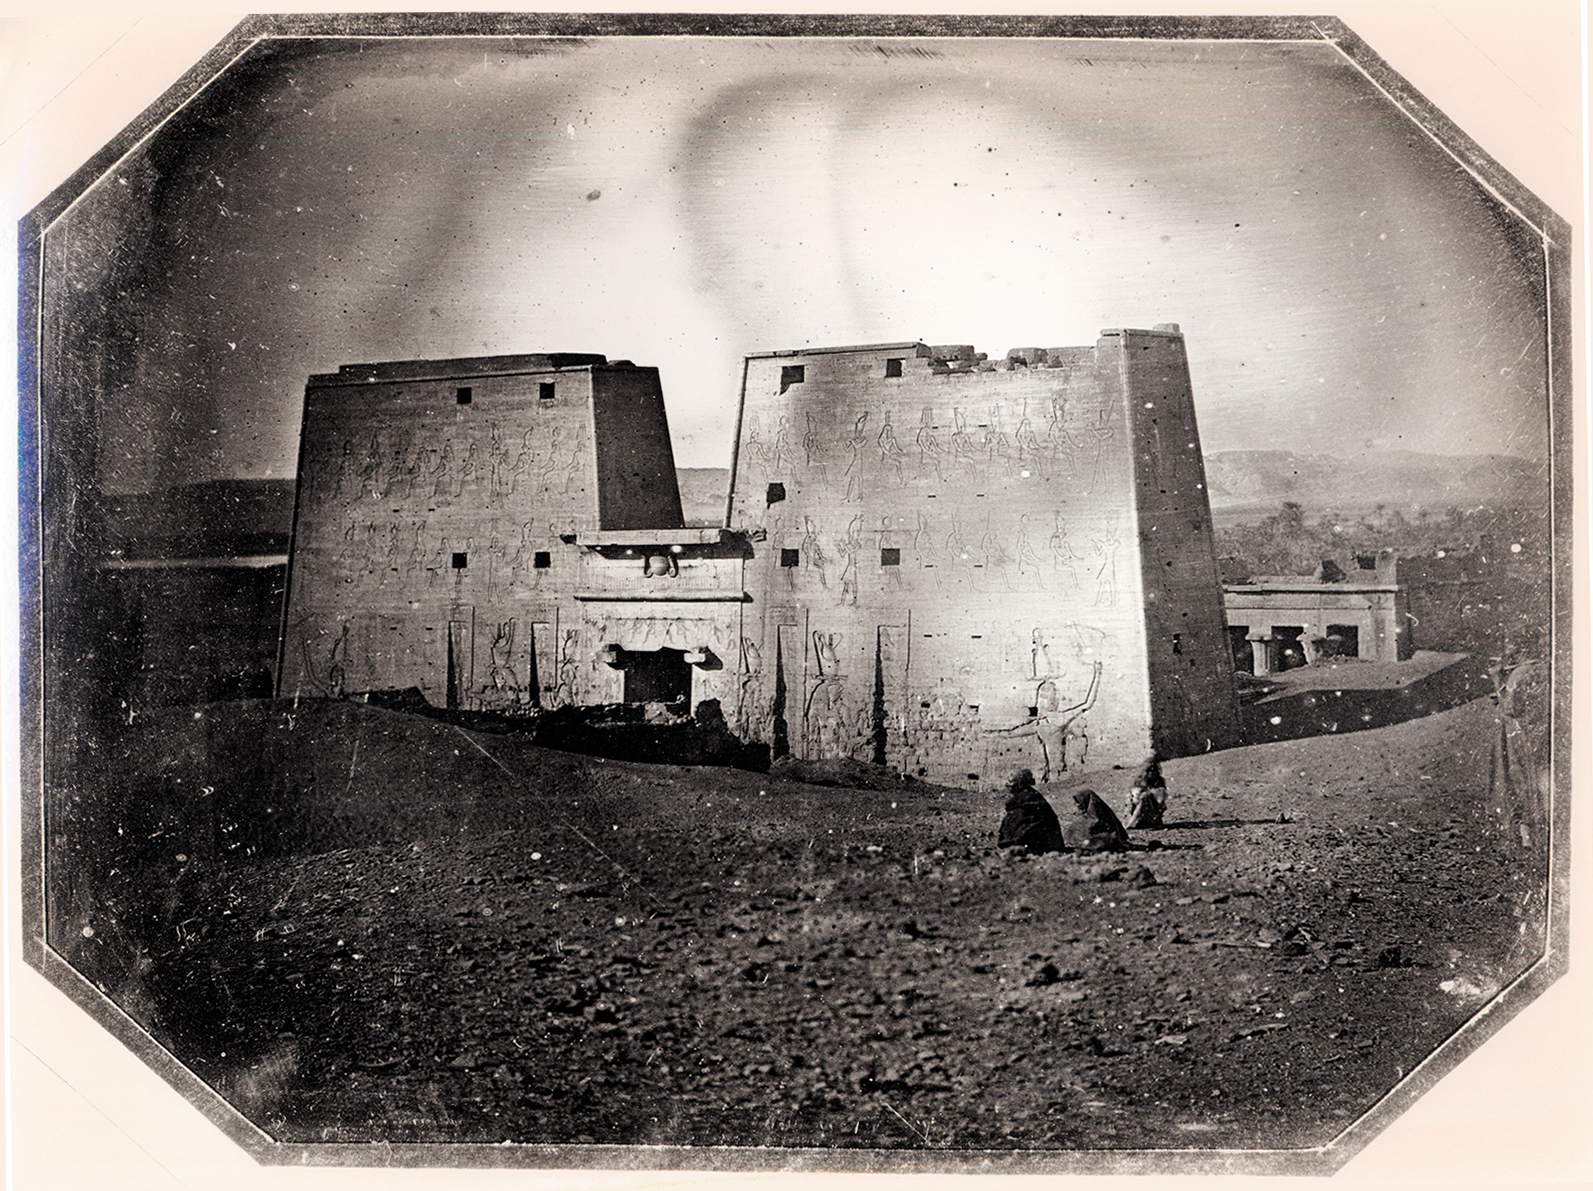 Itier photographed this daguerreotype of Madinat Habu in Luxor in 1845 or 1846. 
